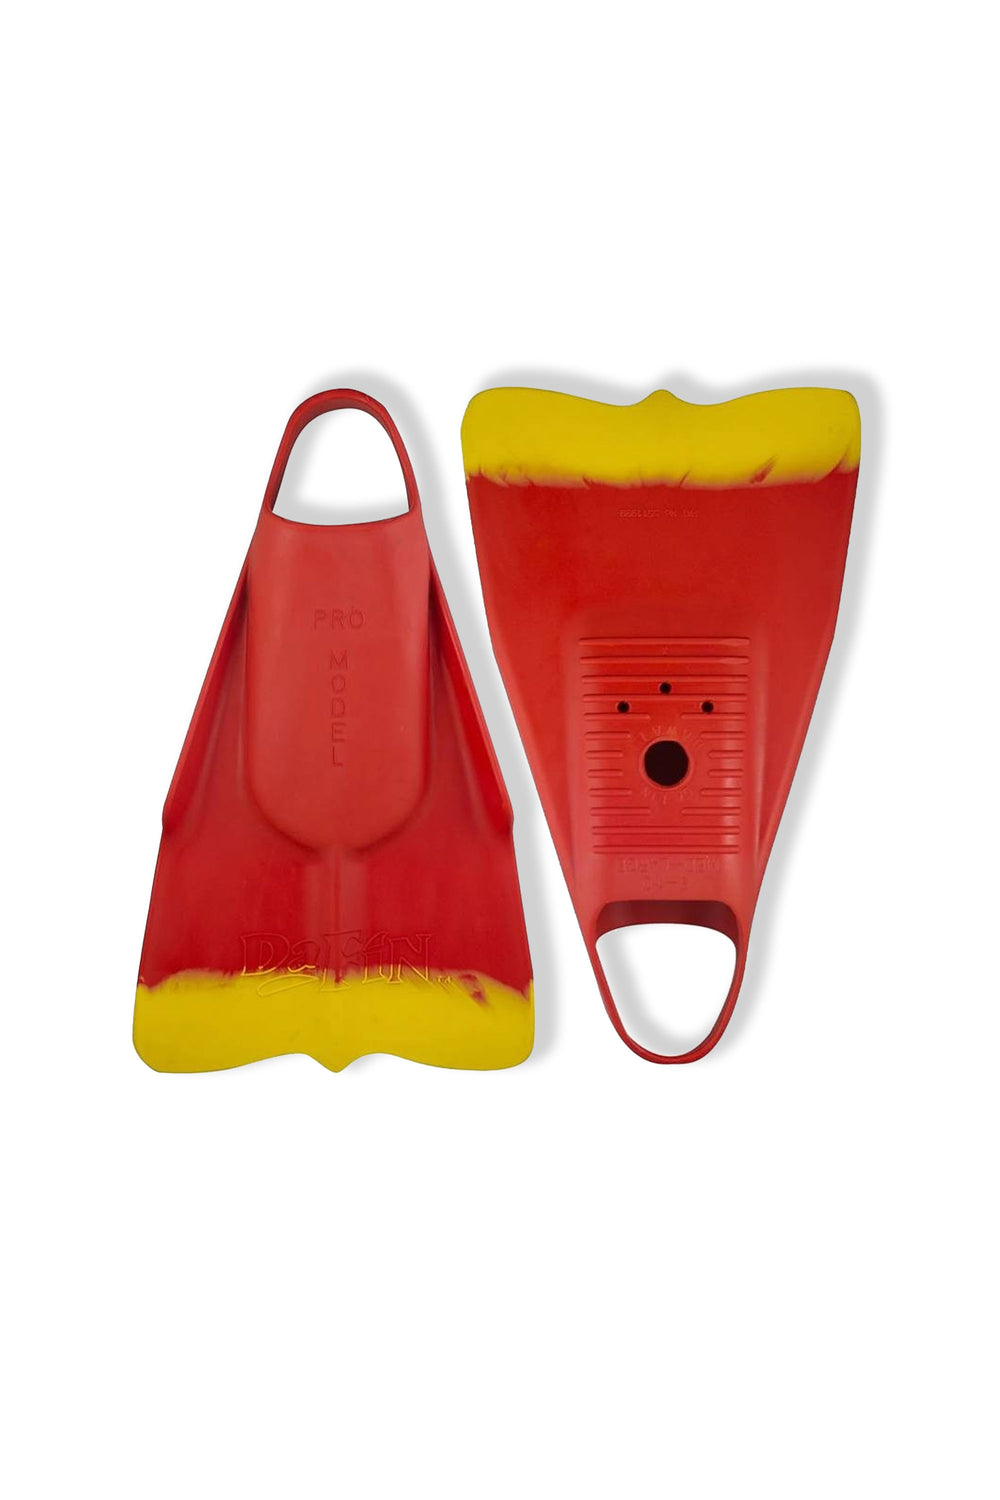 Pukas-Surf-Shop-dafin-pro-classic-red-yellow